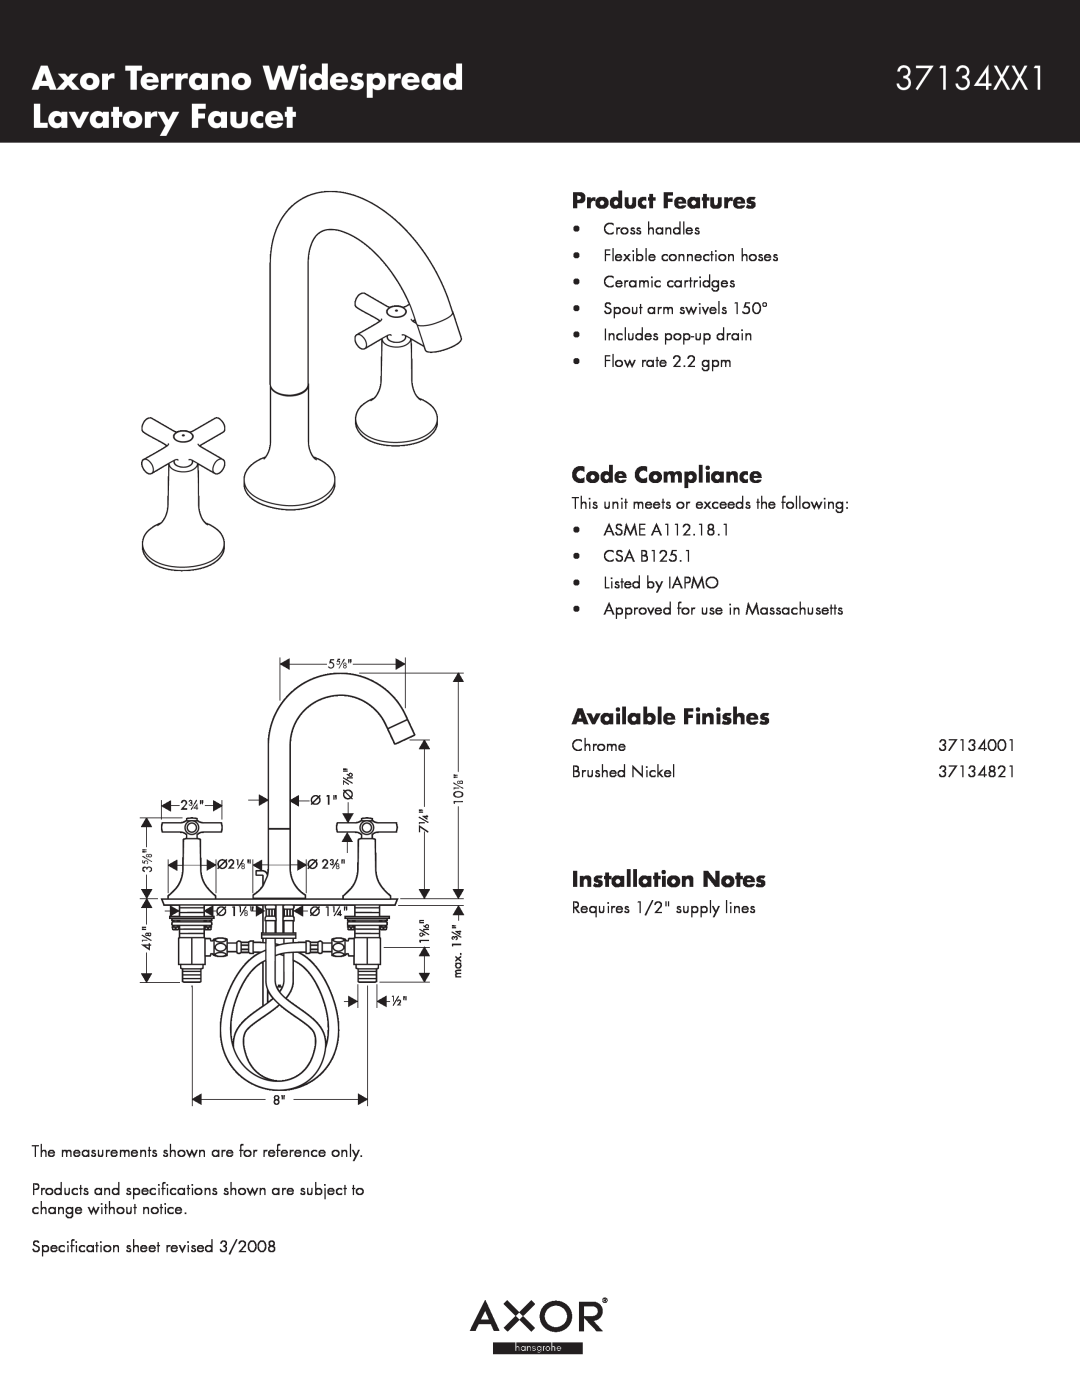 Axor 37134XX1 specifications Axor Terrano Widespread, Lavatory Faucet, Product Features, Code Compliance 